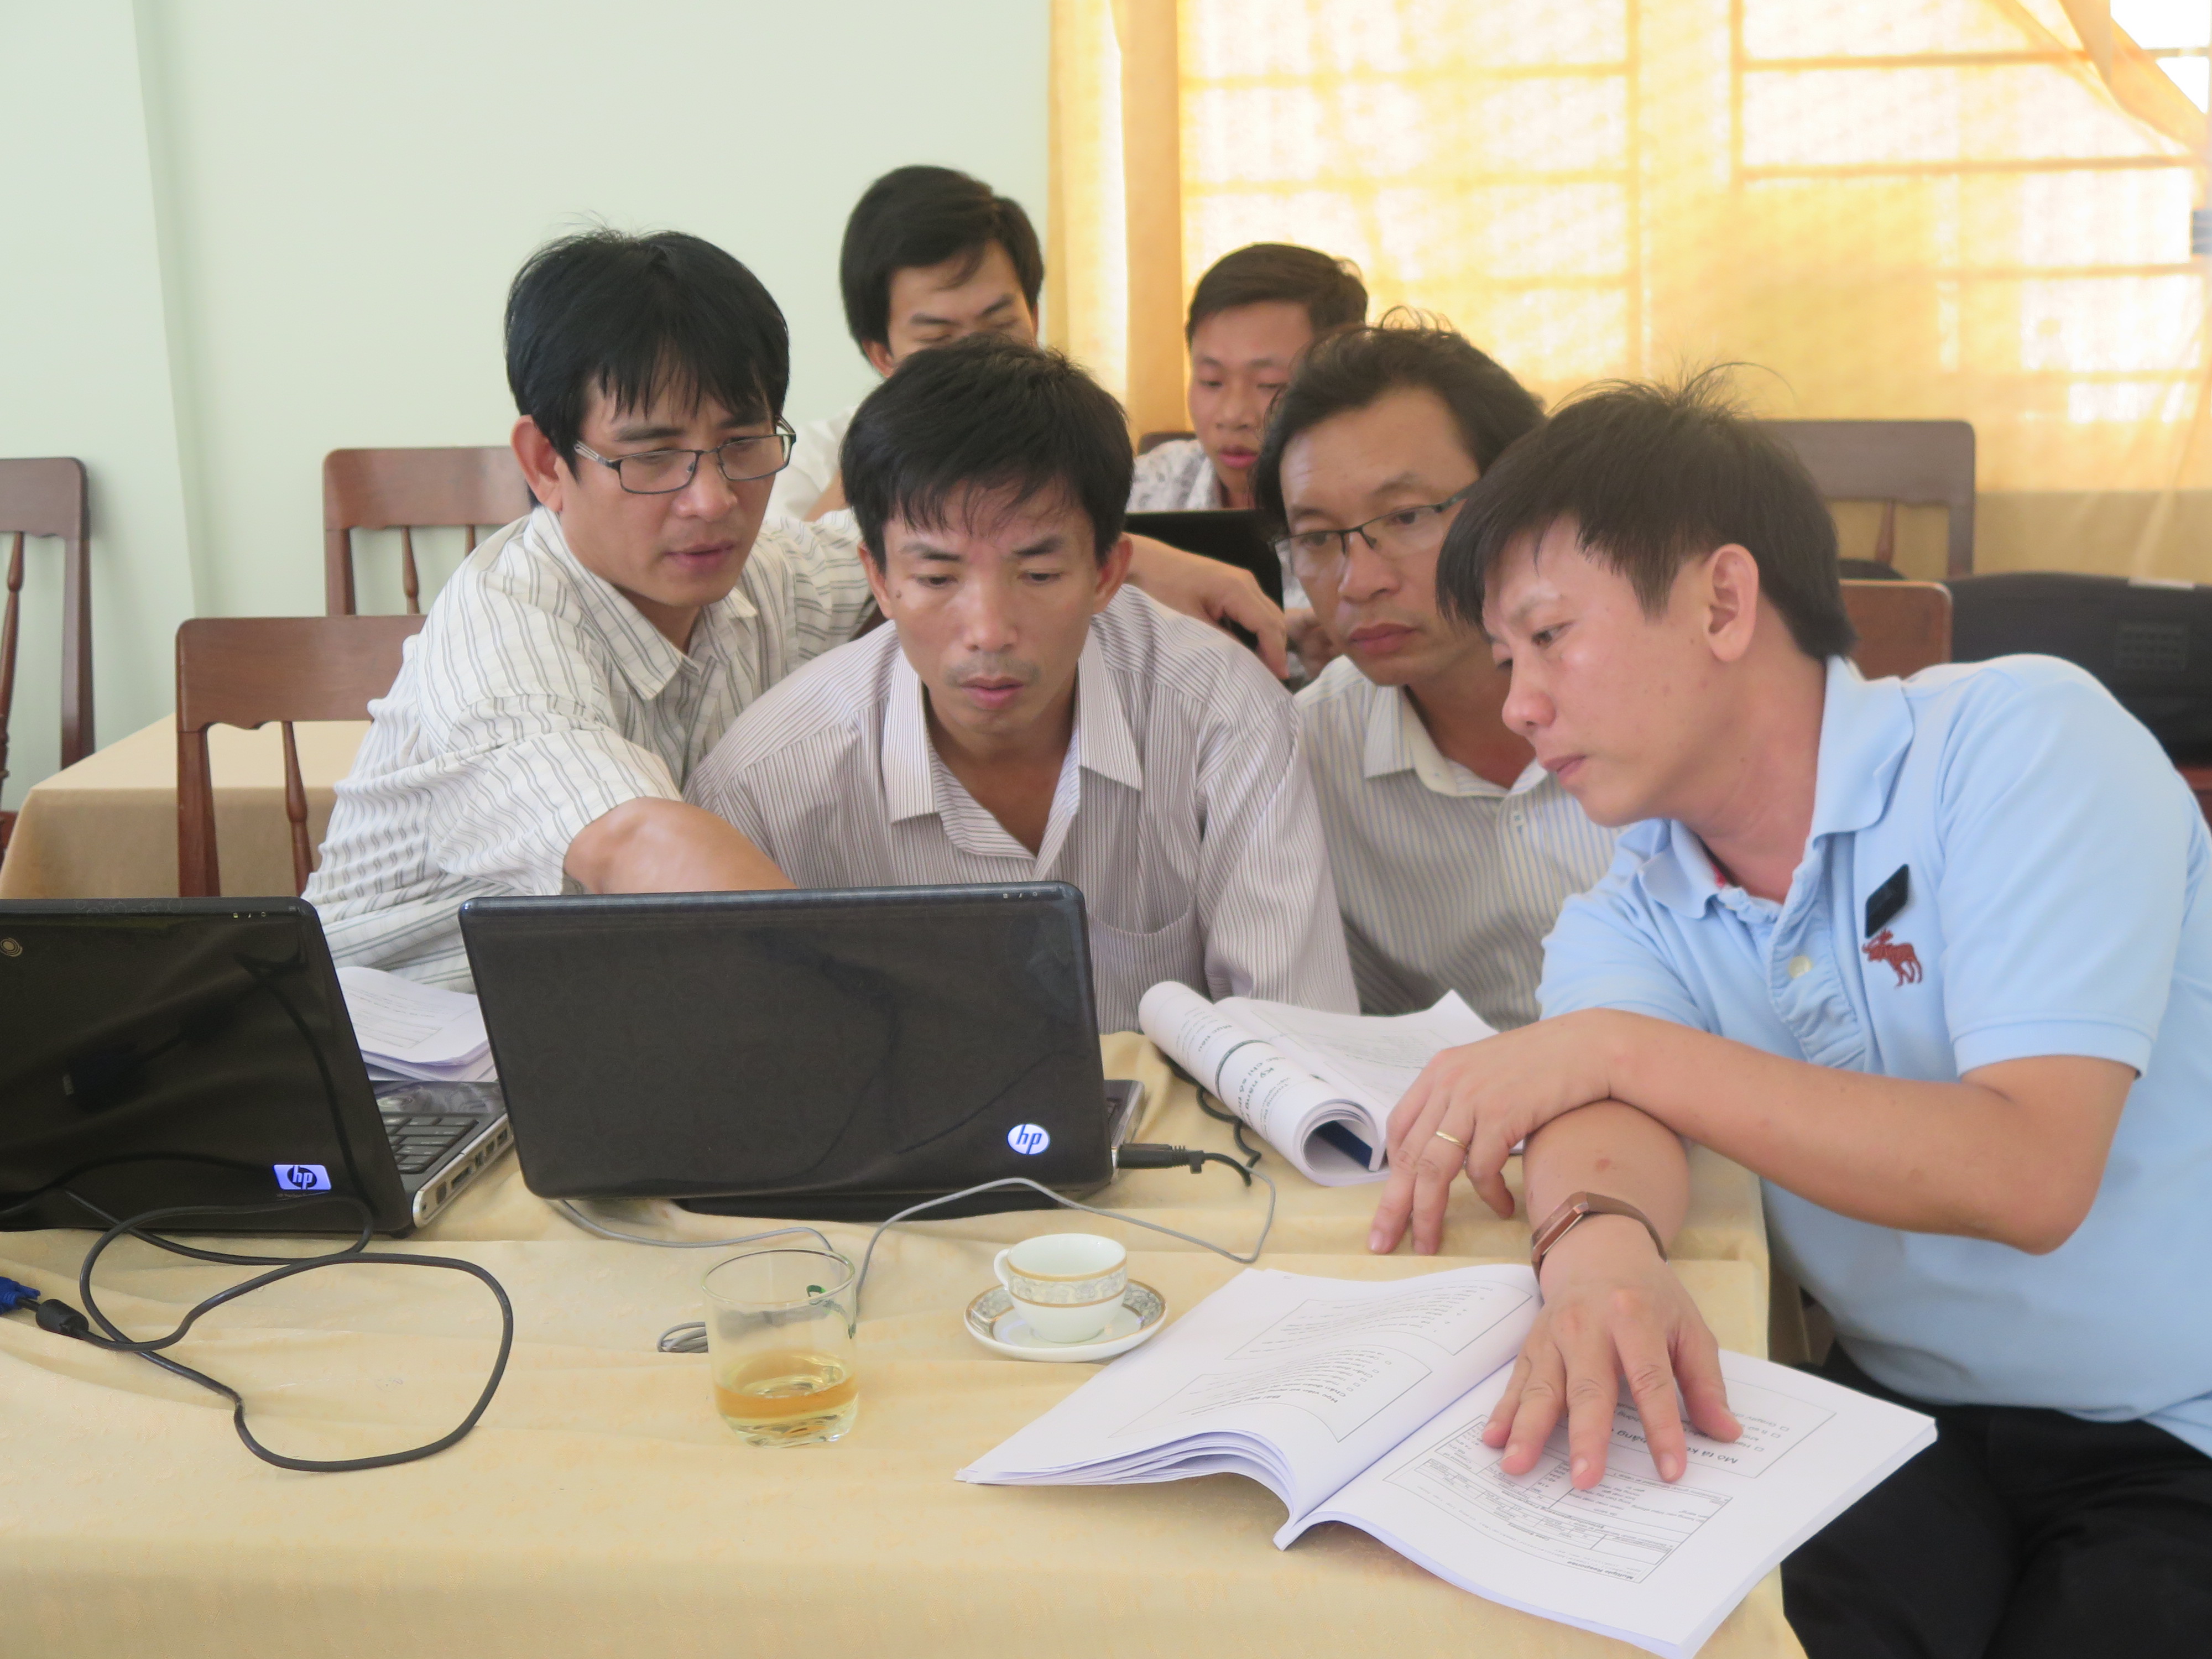 Training data analysis course for health staffs among 6 provinces in central and highland area in Vietnam